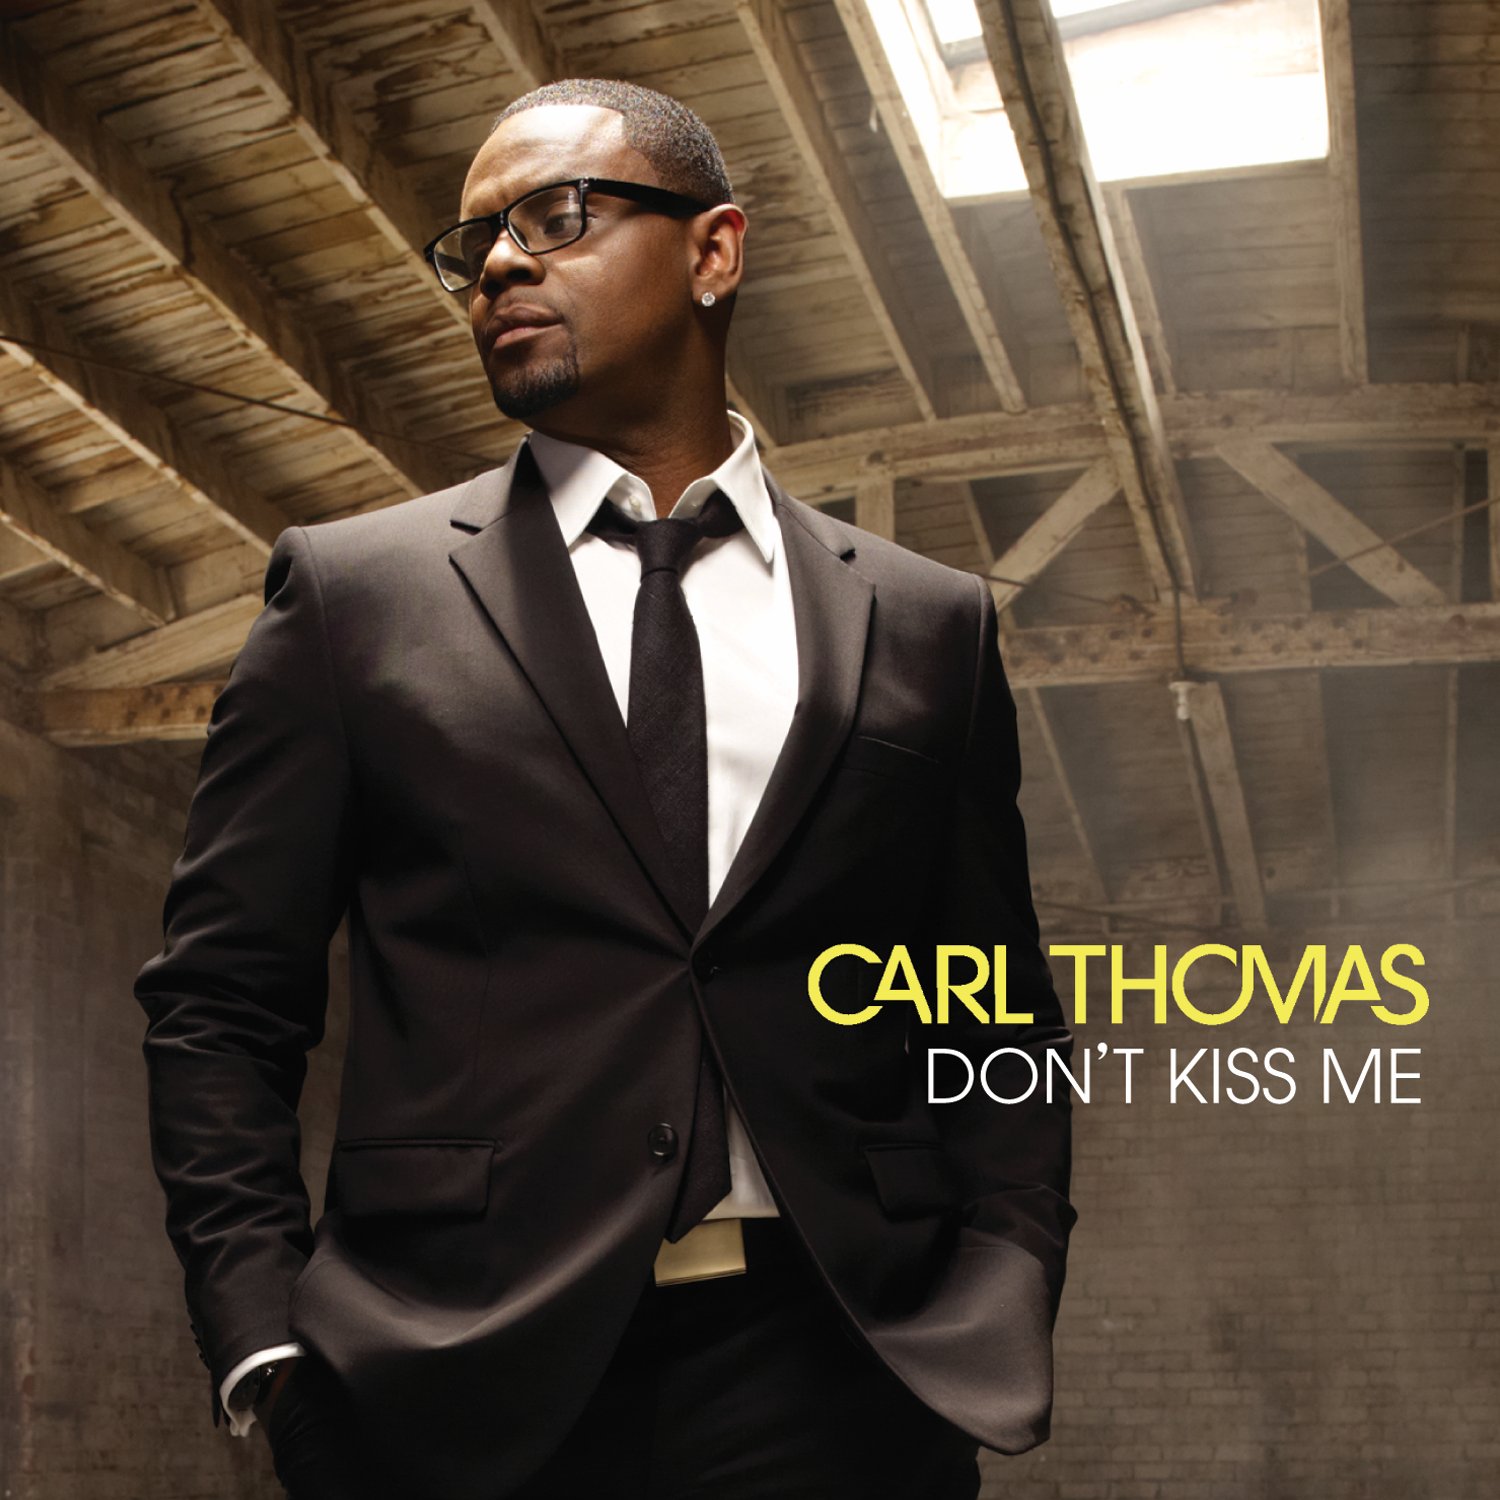 Carl Thomas "Don't Kiss Me" featuring Snoop Dogg (Produced by Rico Love)